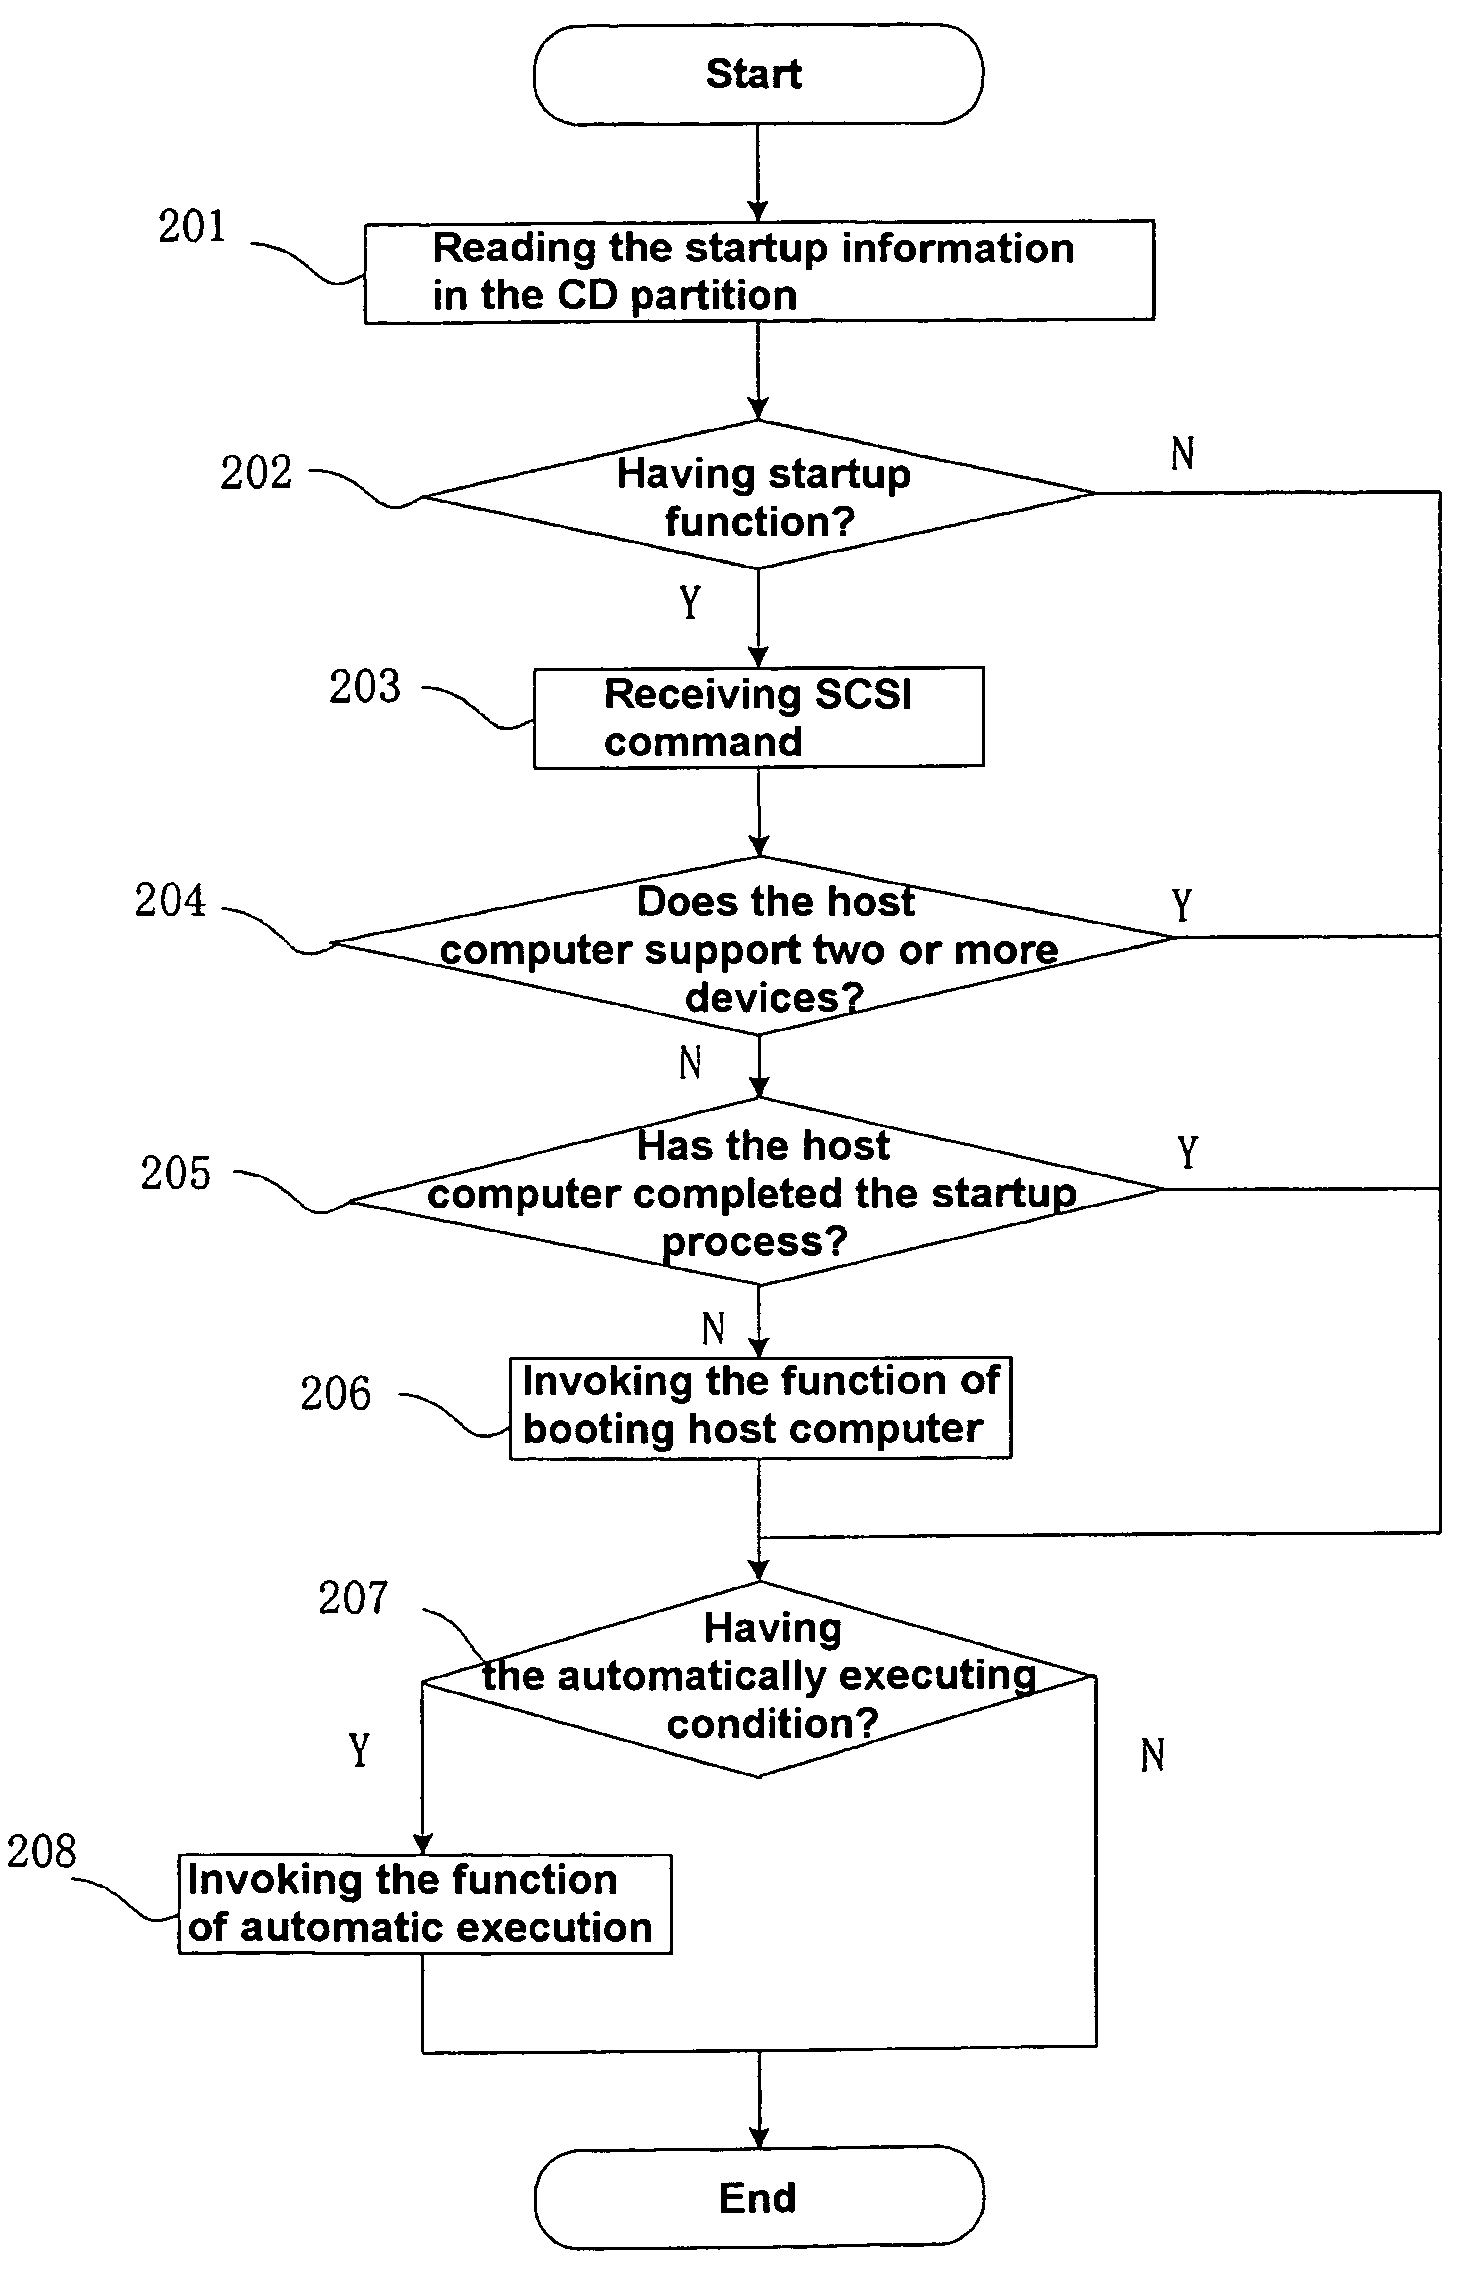 Method for auto-executing and booting-host computer through semiconductor storage device